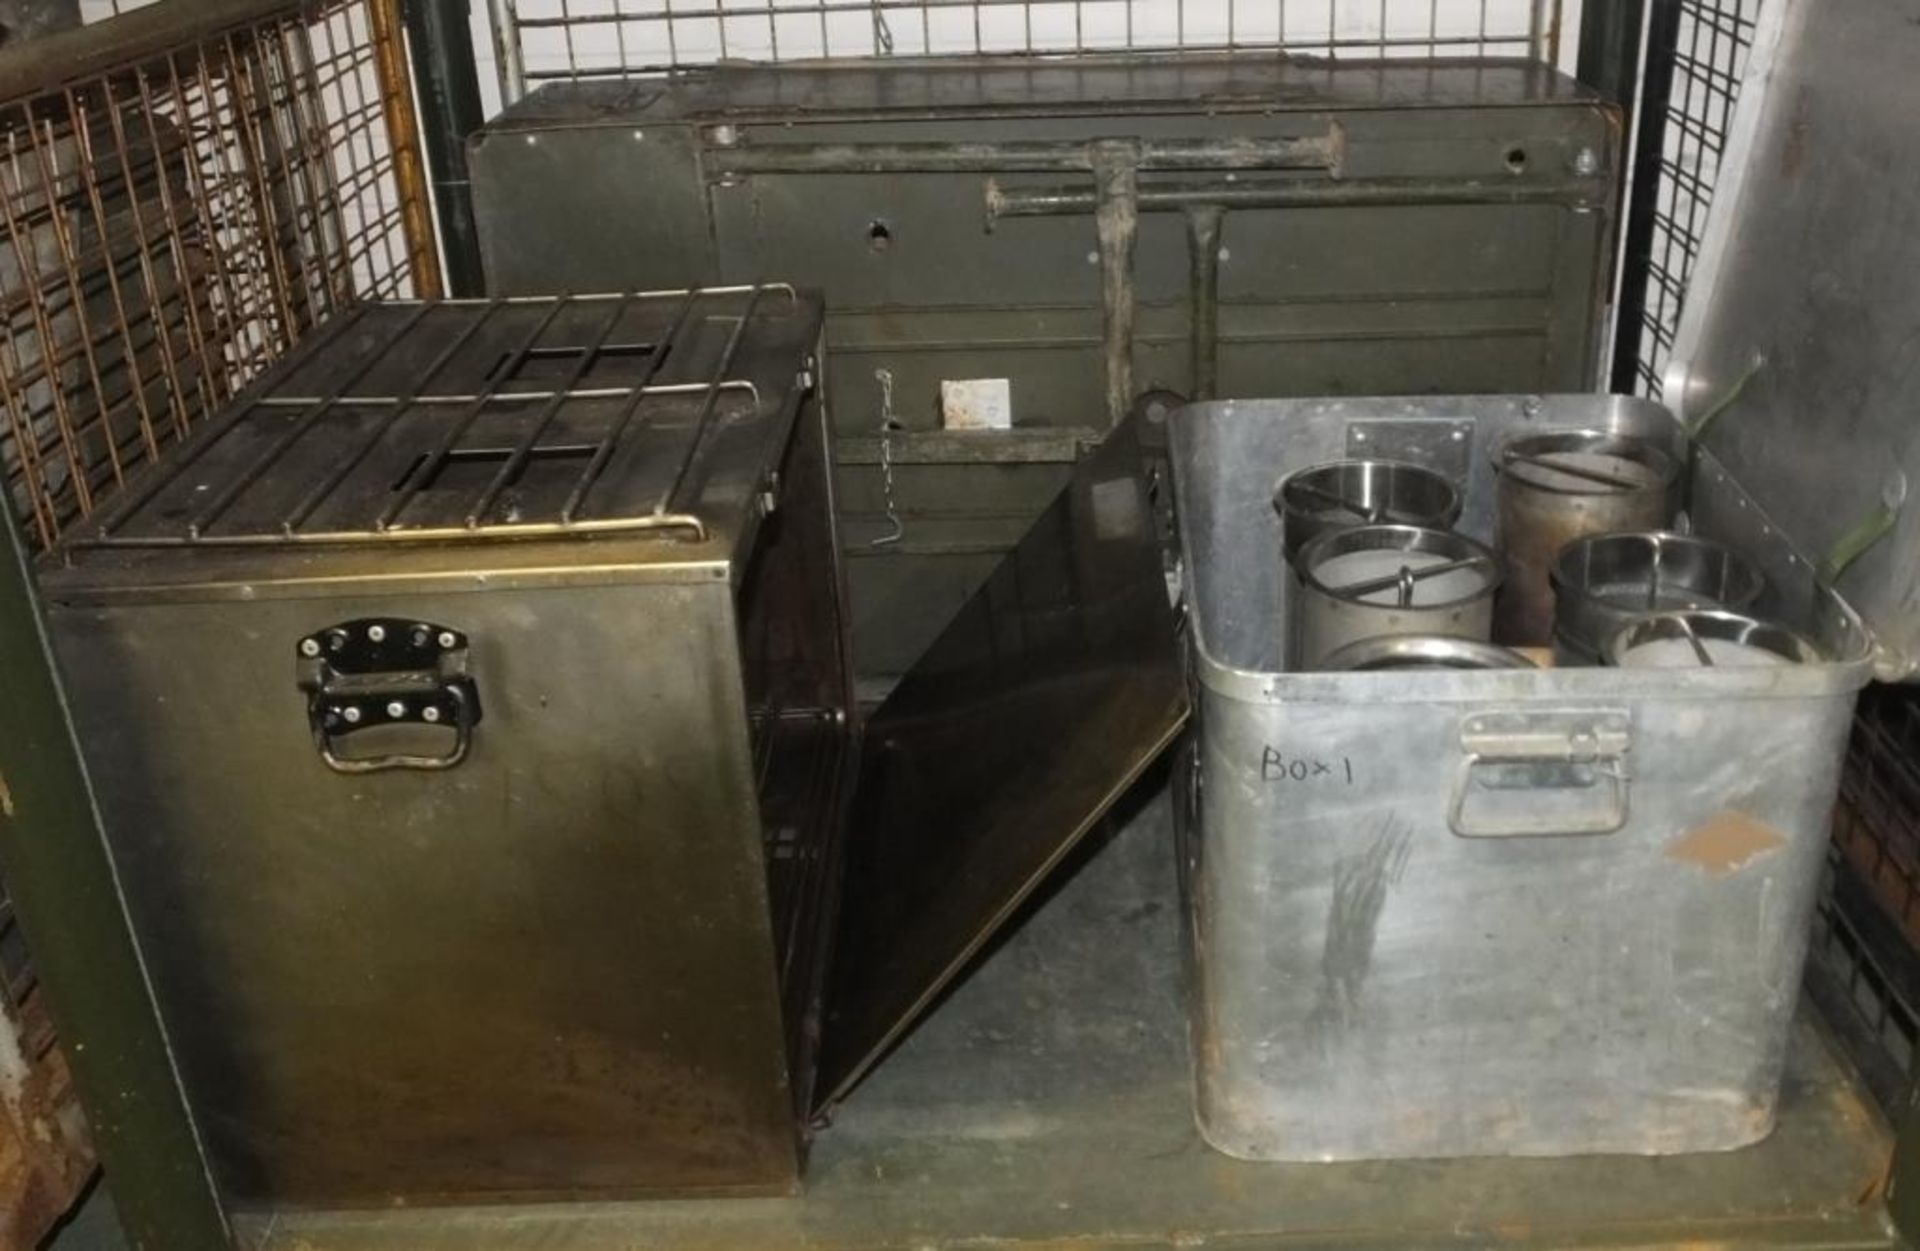 Field Kitchen set - cooker, oven, sieve set in carry box, norweigen food boxes - Image 3 of 4